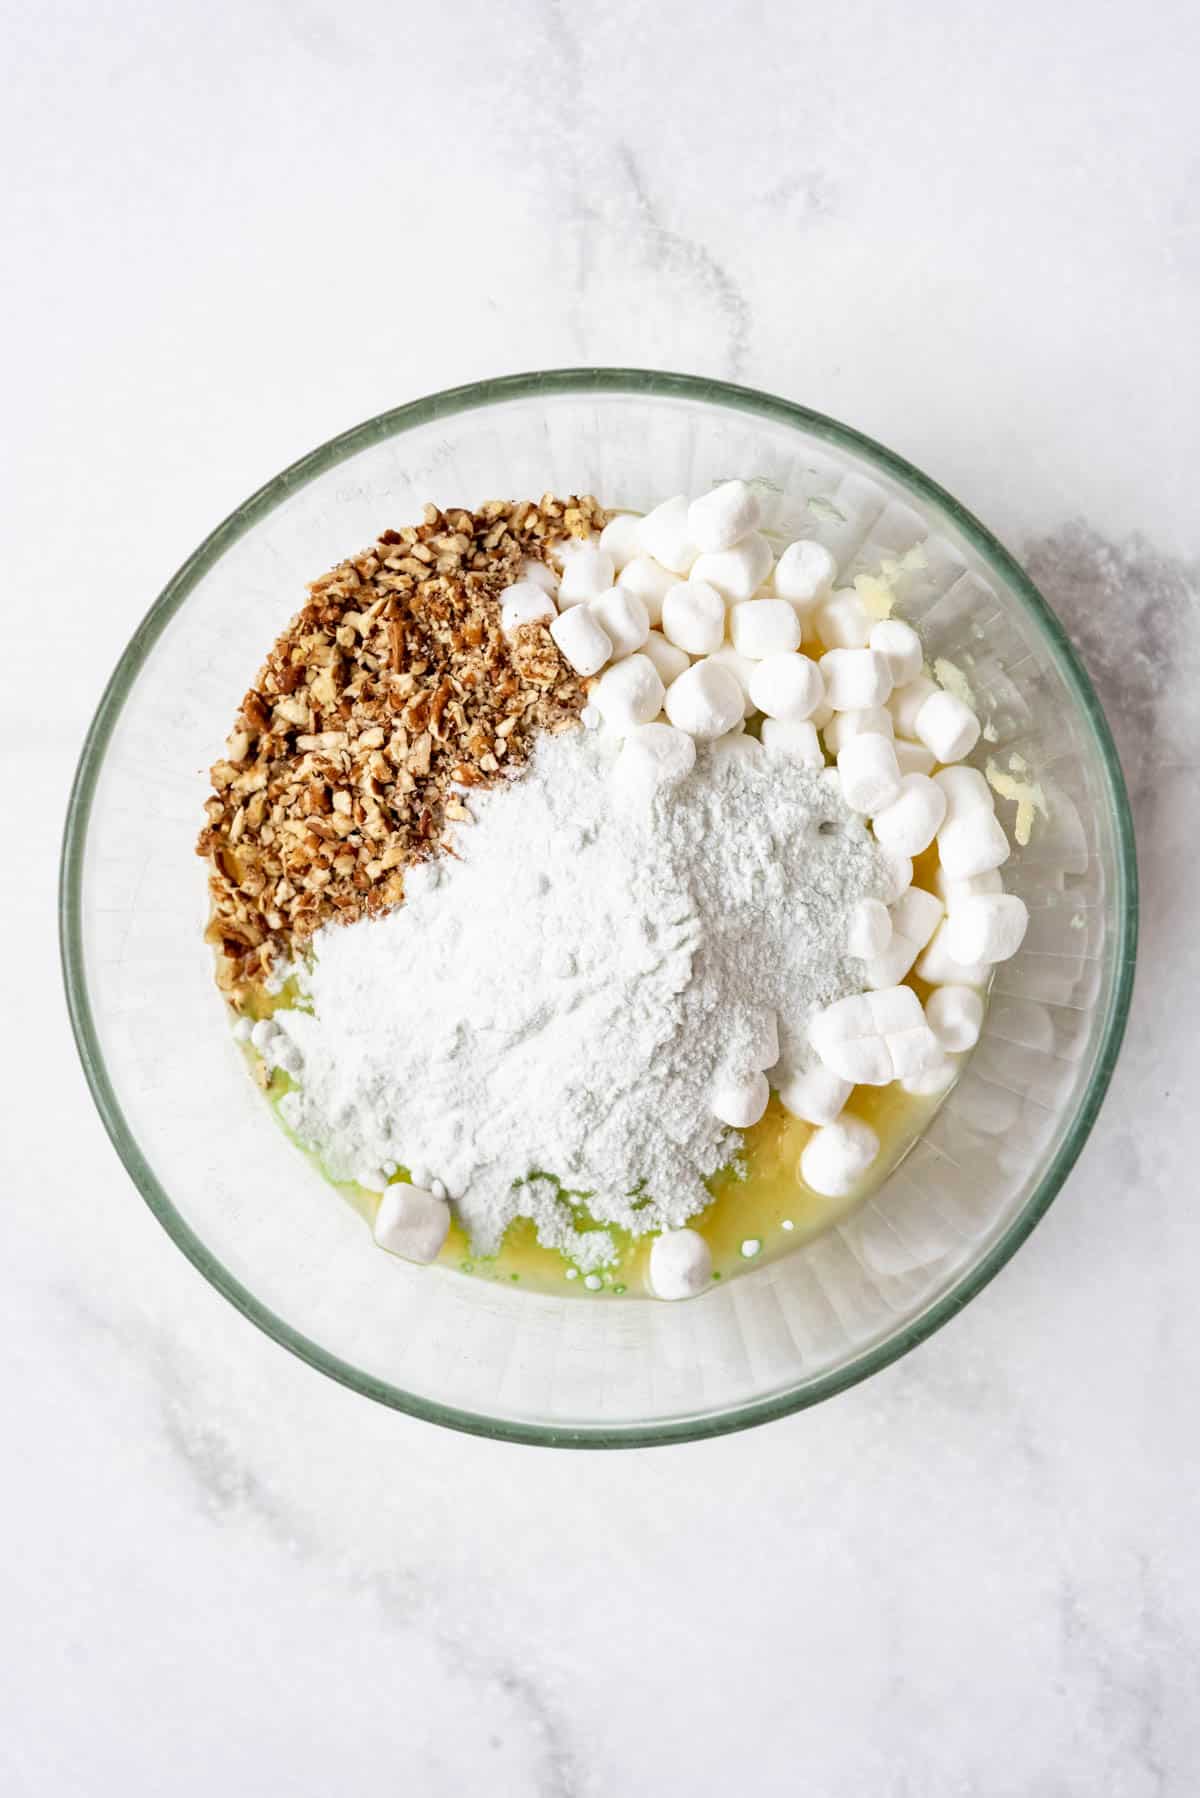 Crushed pineapple, chopped pecans, marshmallows, and instant pistachio pudding mix in a glass bowl.